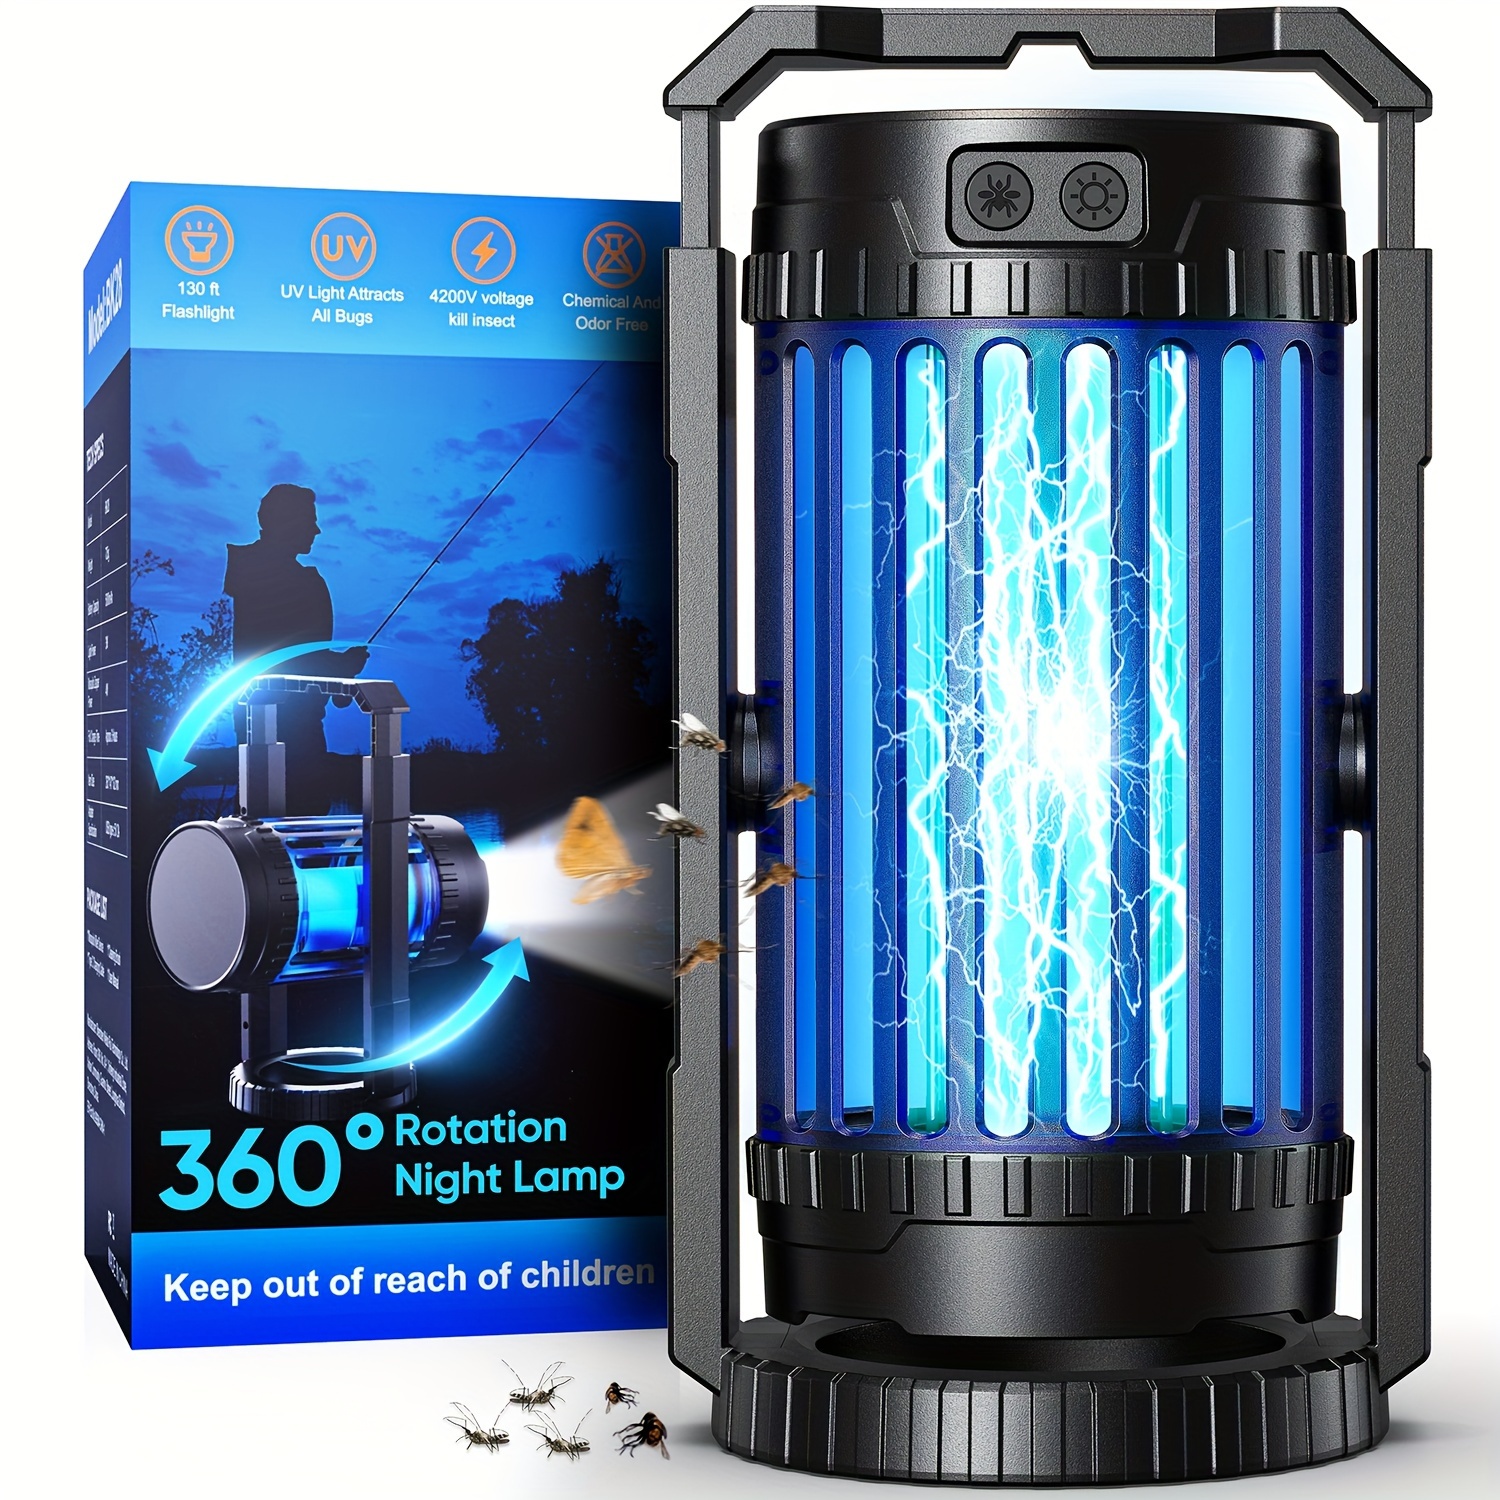 

Bug Zapper Outdoor, Mosquito Zapper 4 In 1 Fly Zapper With 5000mah Battery, Portable & Rechargeable Bug Zapper Outdoor Indoor With Spotlights For Camping, Fishing, Patio, Garden, Kitchen